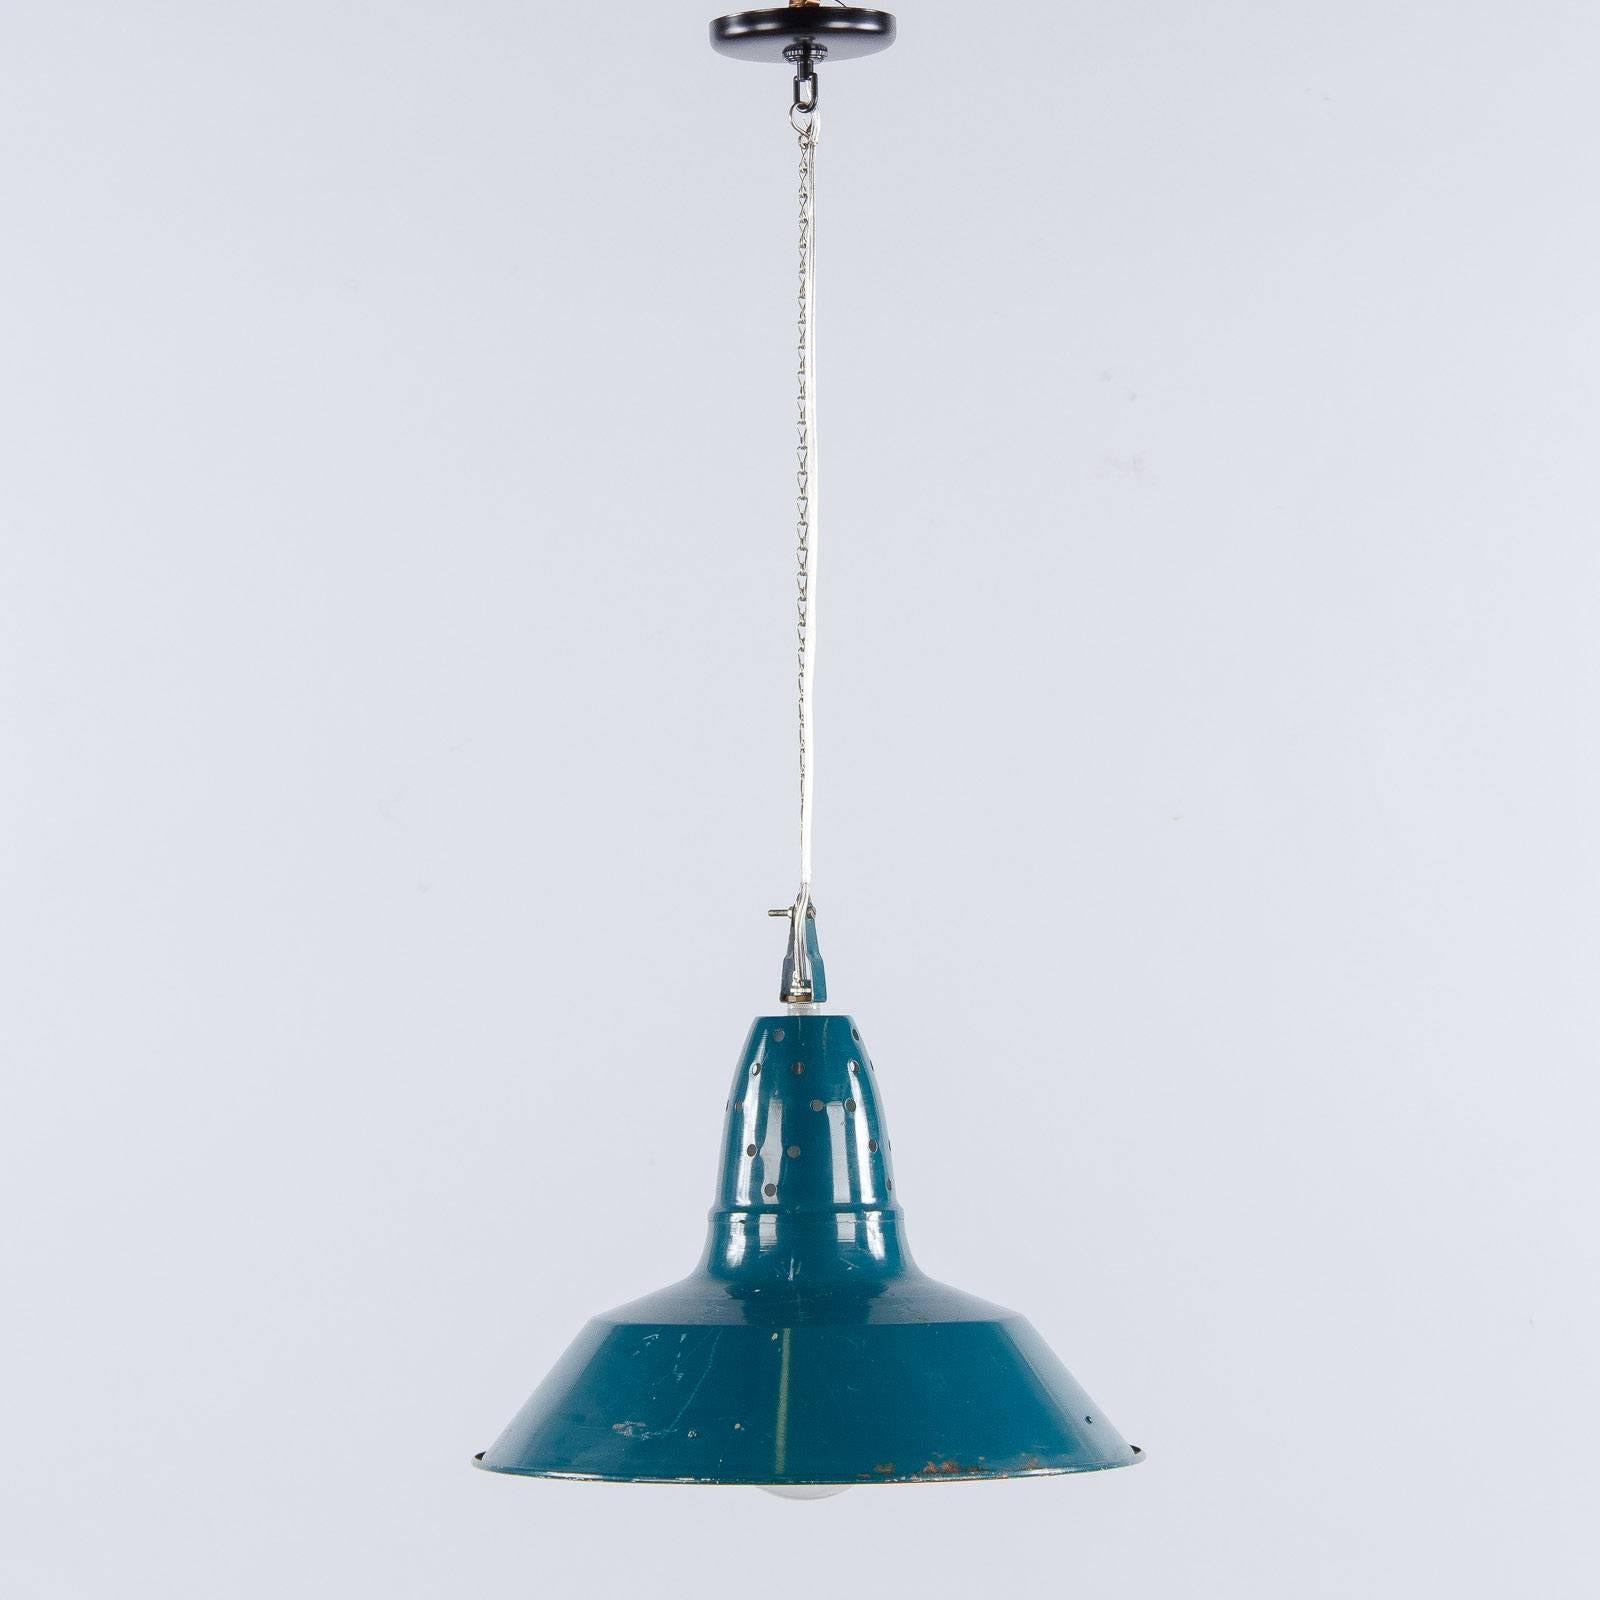 A 1950s French Industrial pendant in blue/green metal. The chain and canopy add an additional 24